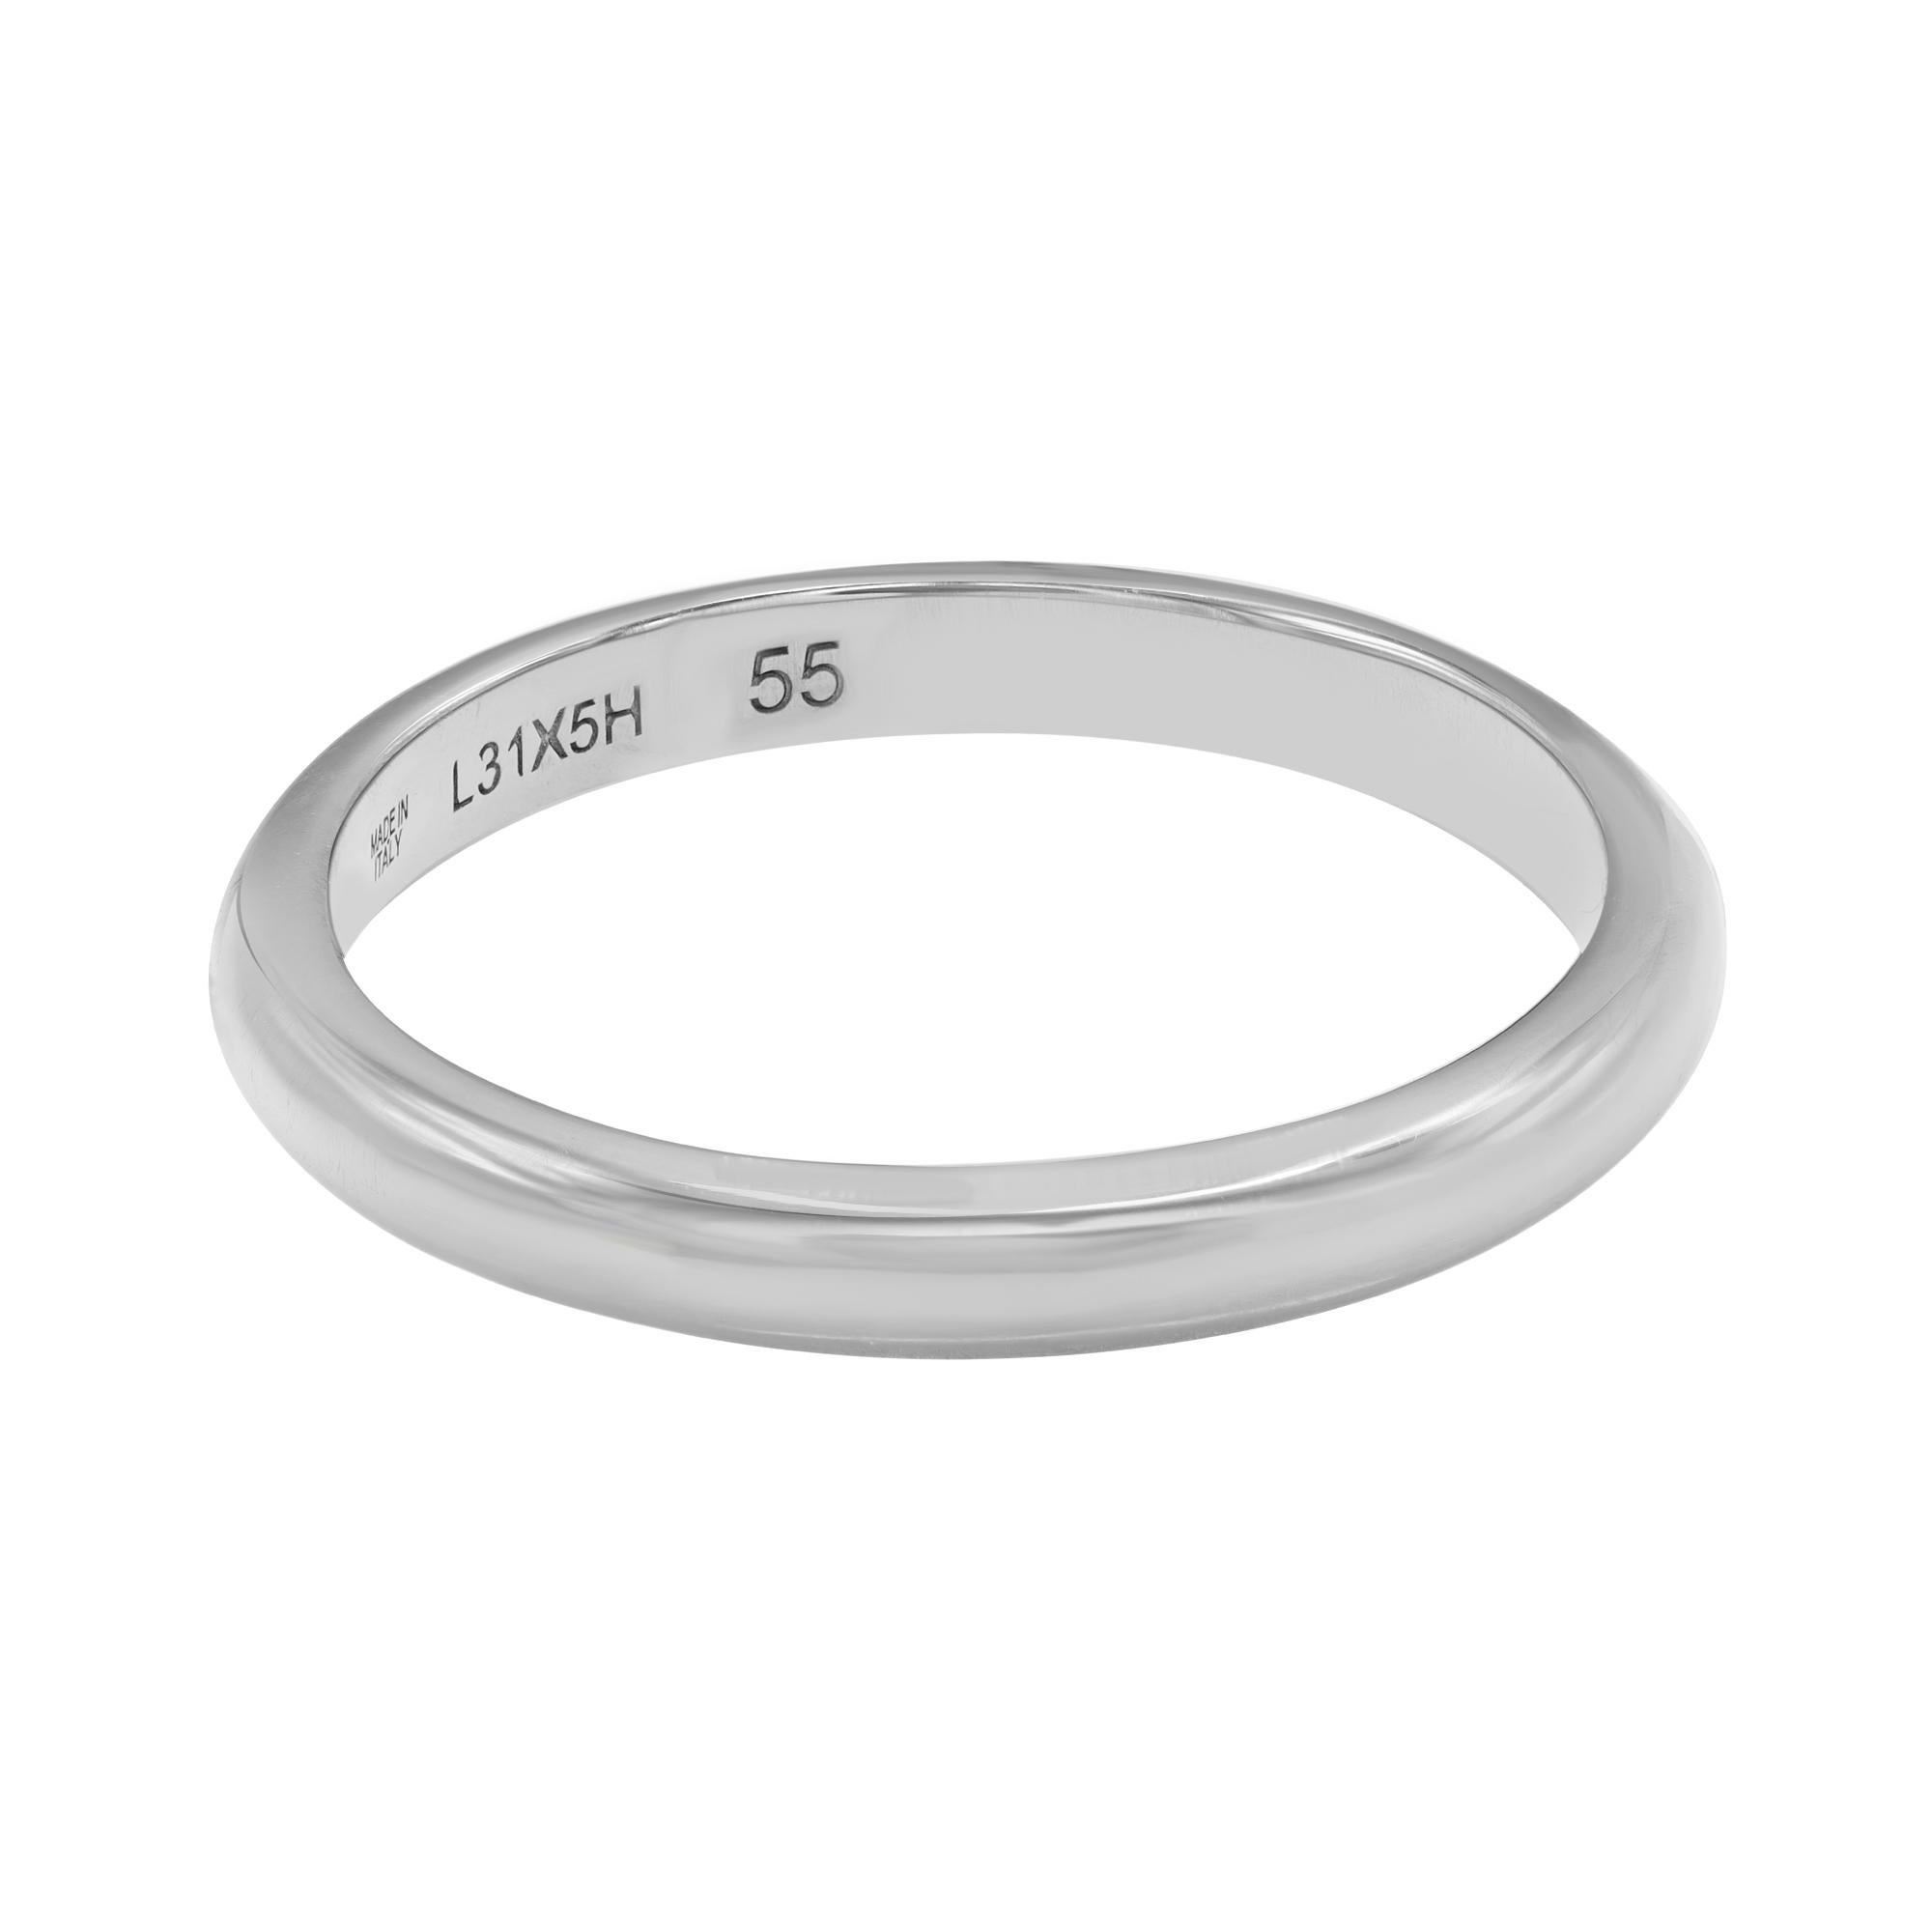 The Bvlgari Fedi wedding band seals a love bond forever. Crafted in highly polished platinum 950. Ring width: 2.6mm. Ring size: 7.25. Total weight: 4.64 grams. Excellent pre-owned condition. Original box and papers are not included. Comes with a